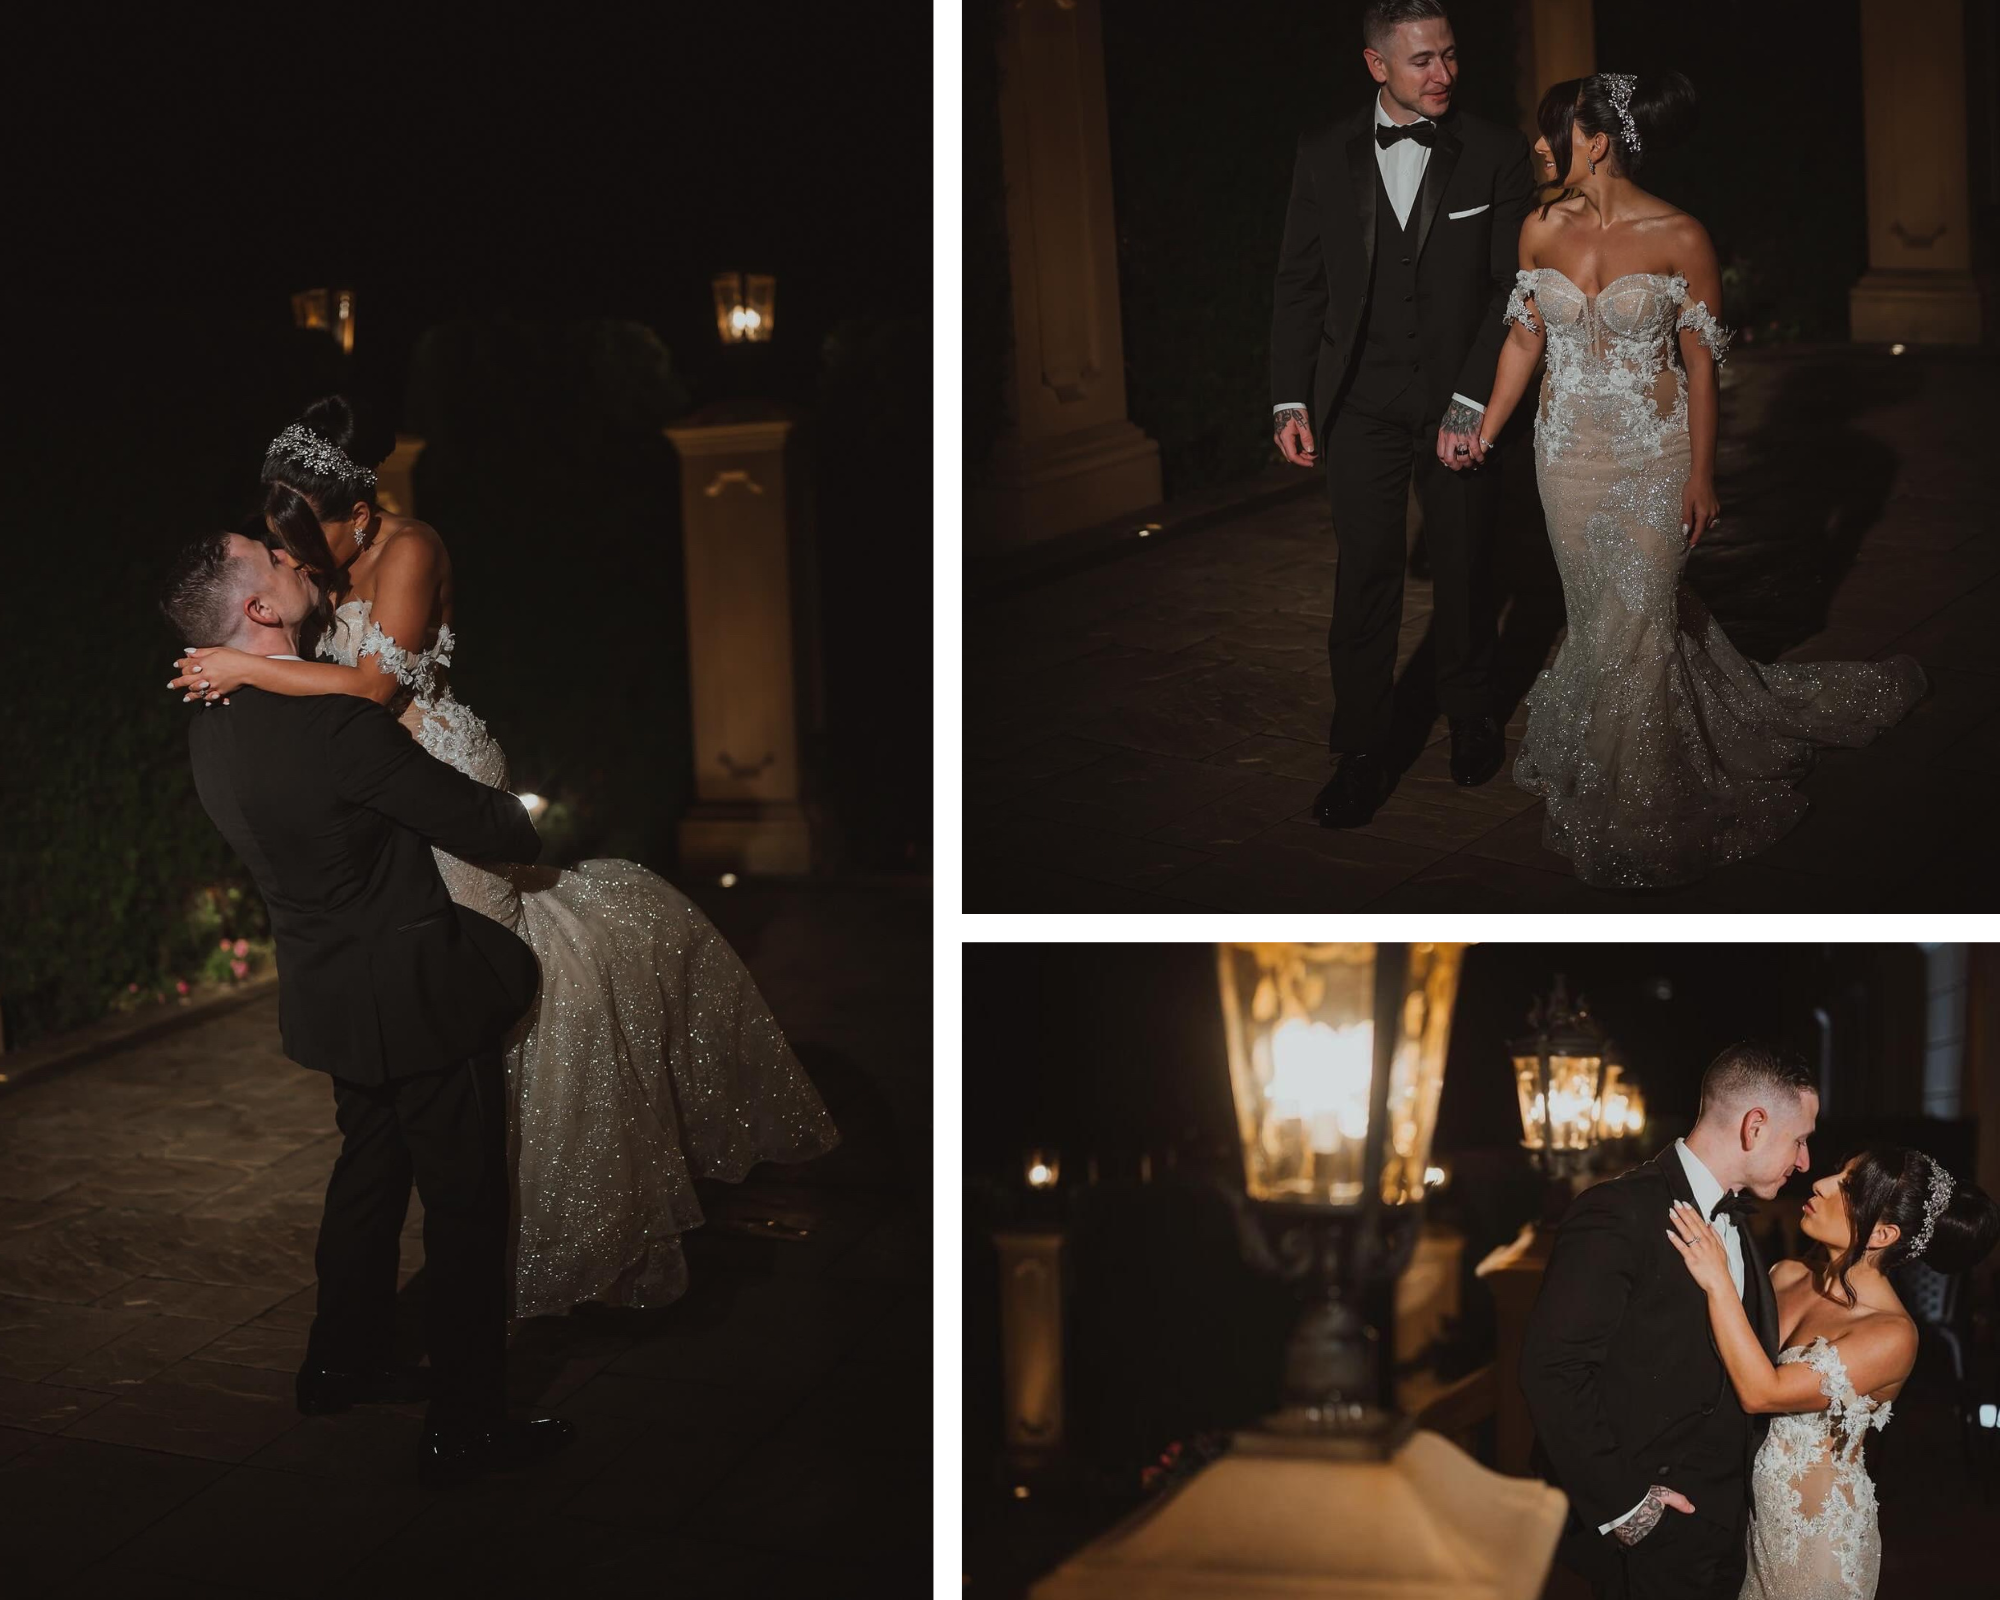 Romantic pictures of our bride kissing her groom.